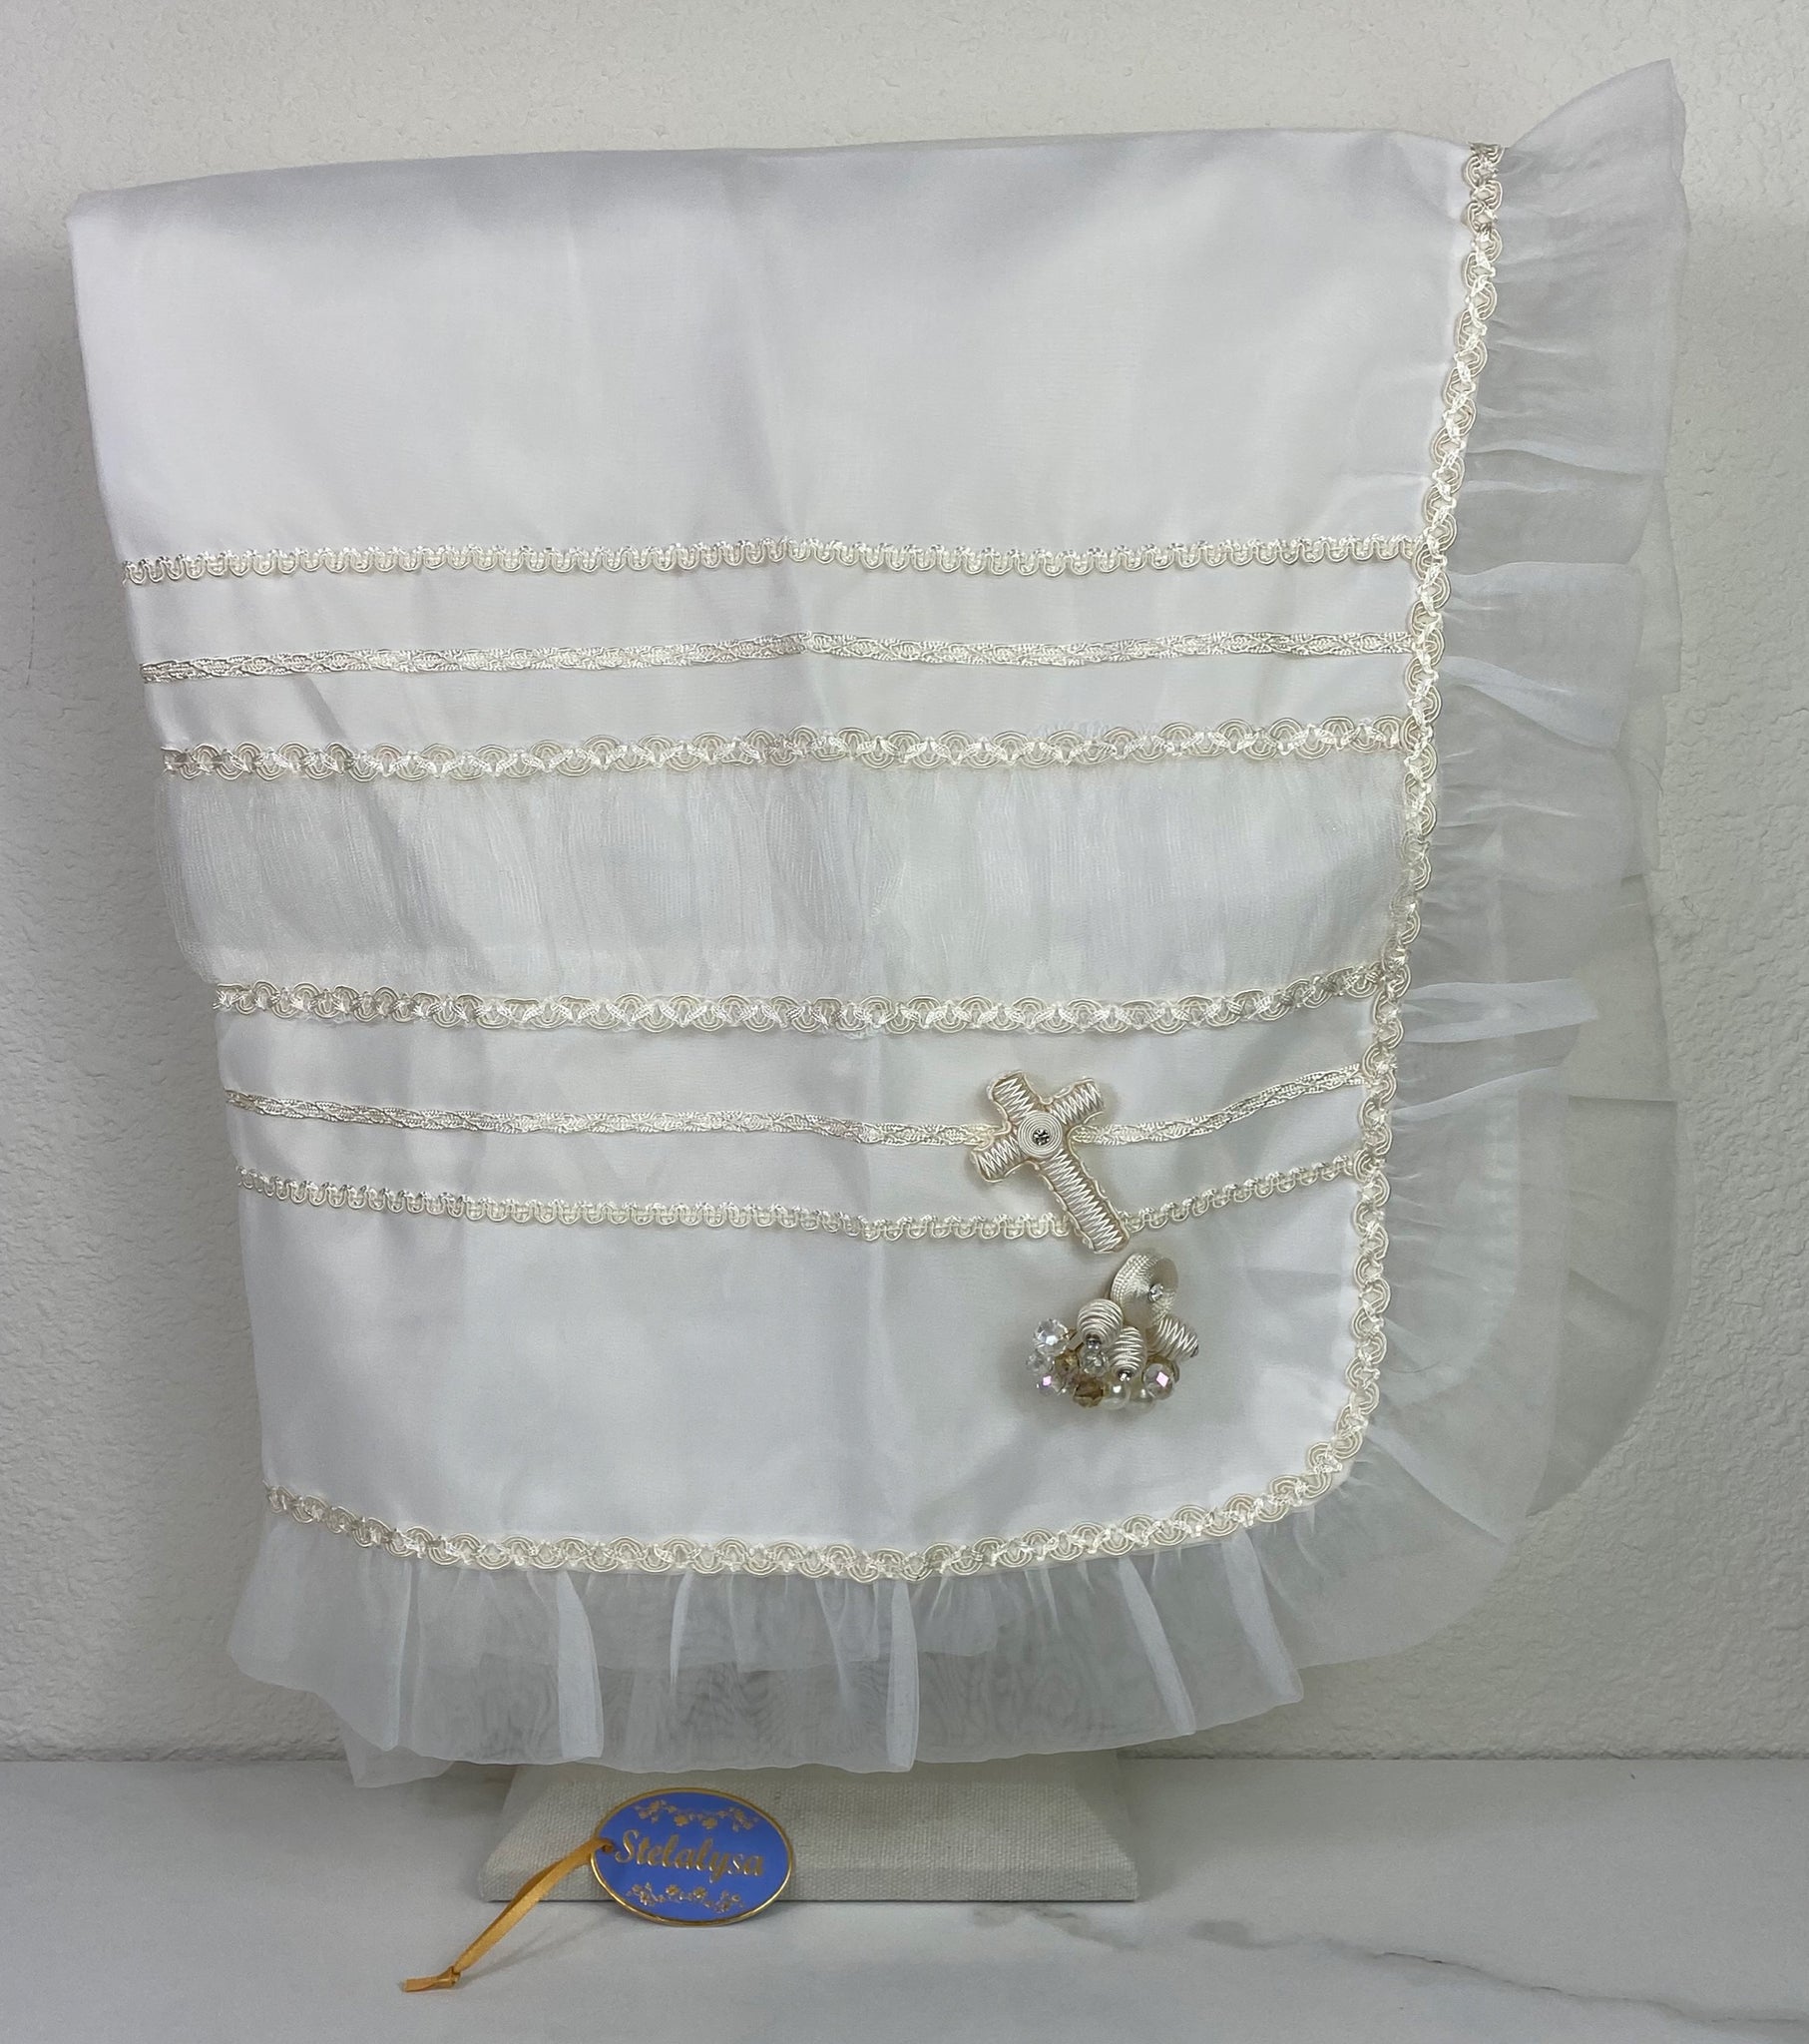 Beautiful ivory tulle silk baptism blanket with cross, ruffled edge, and jewels.